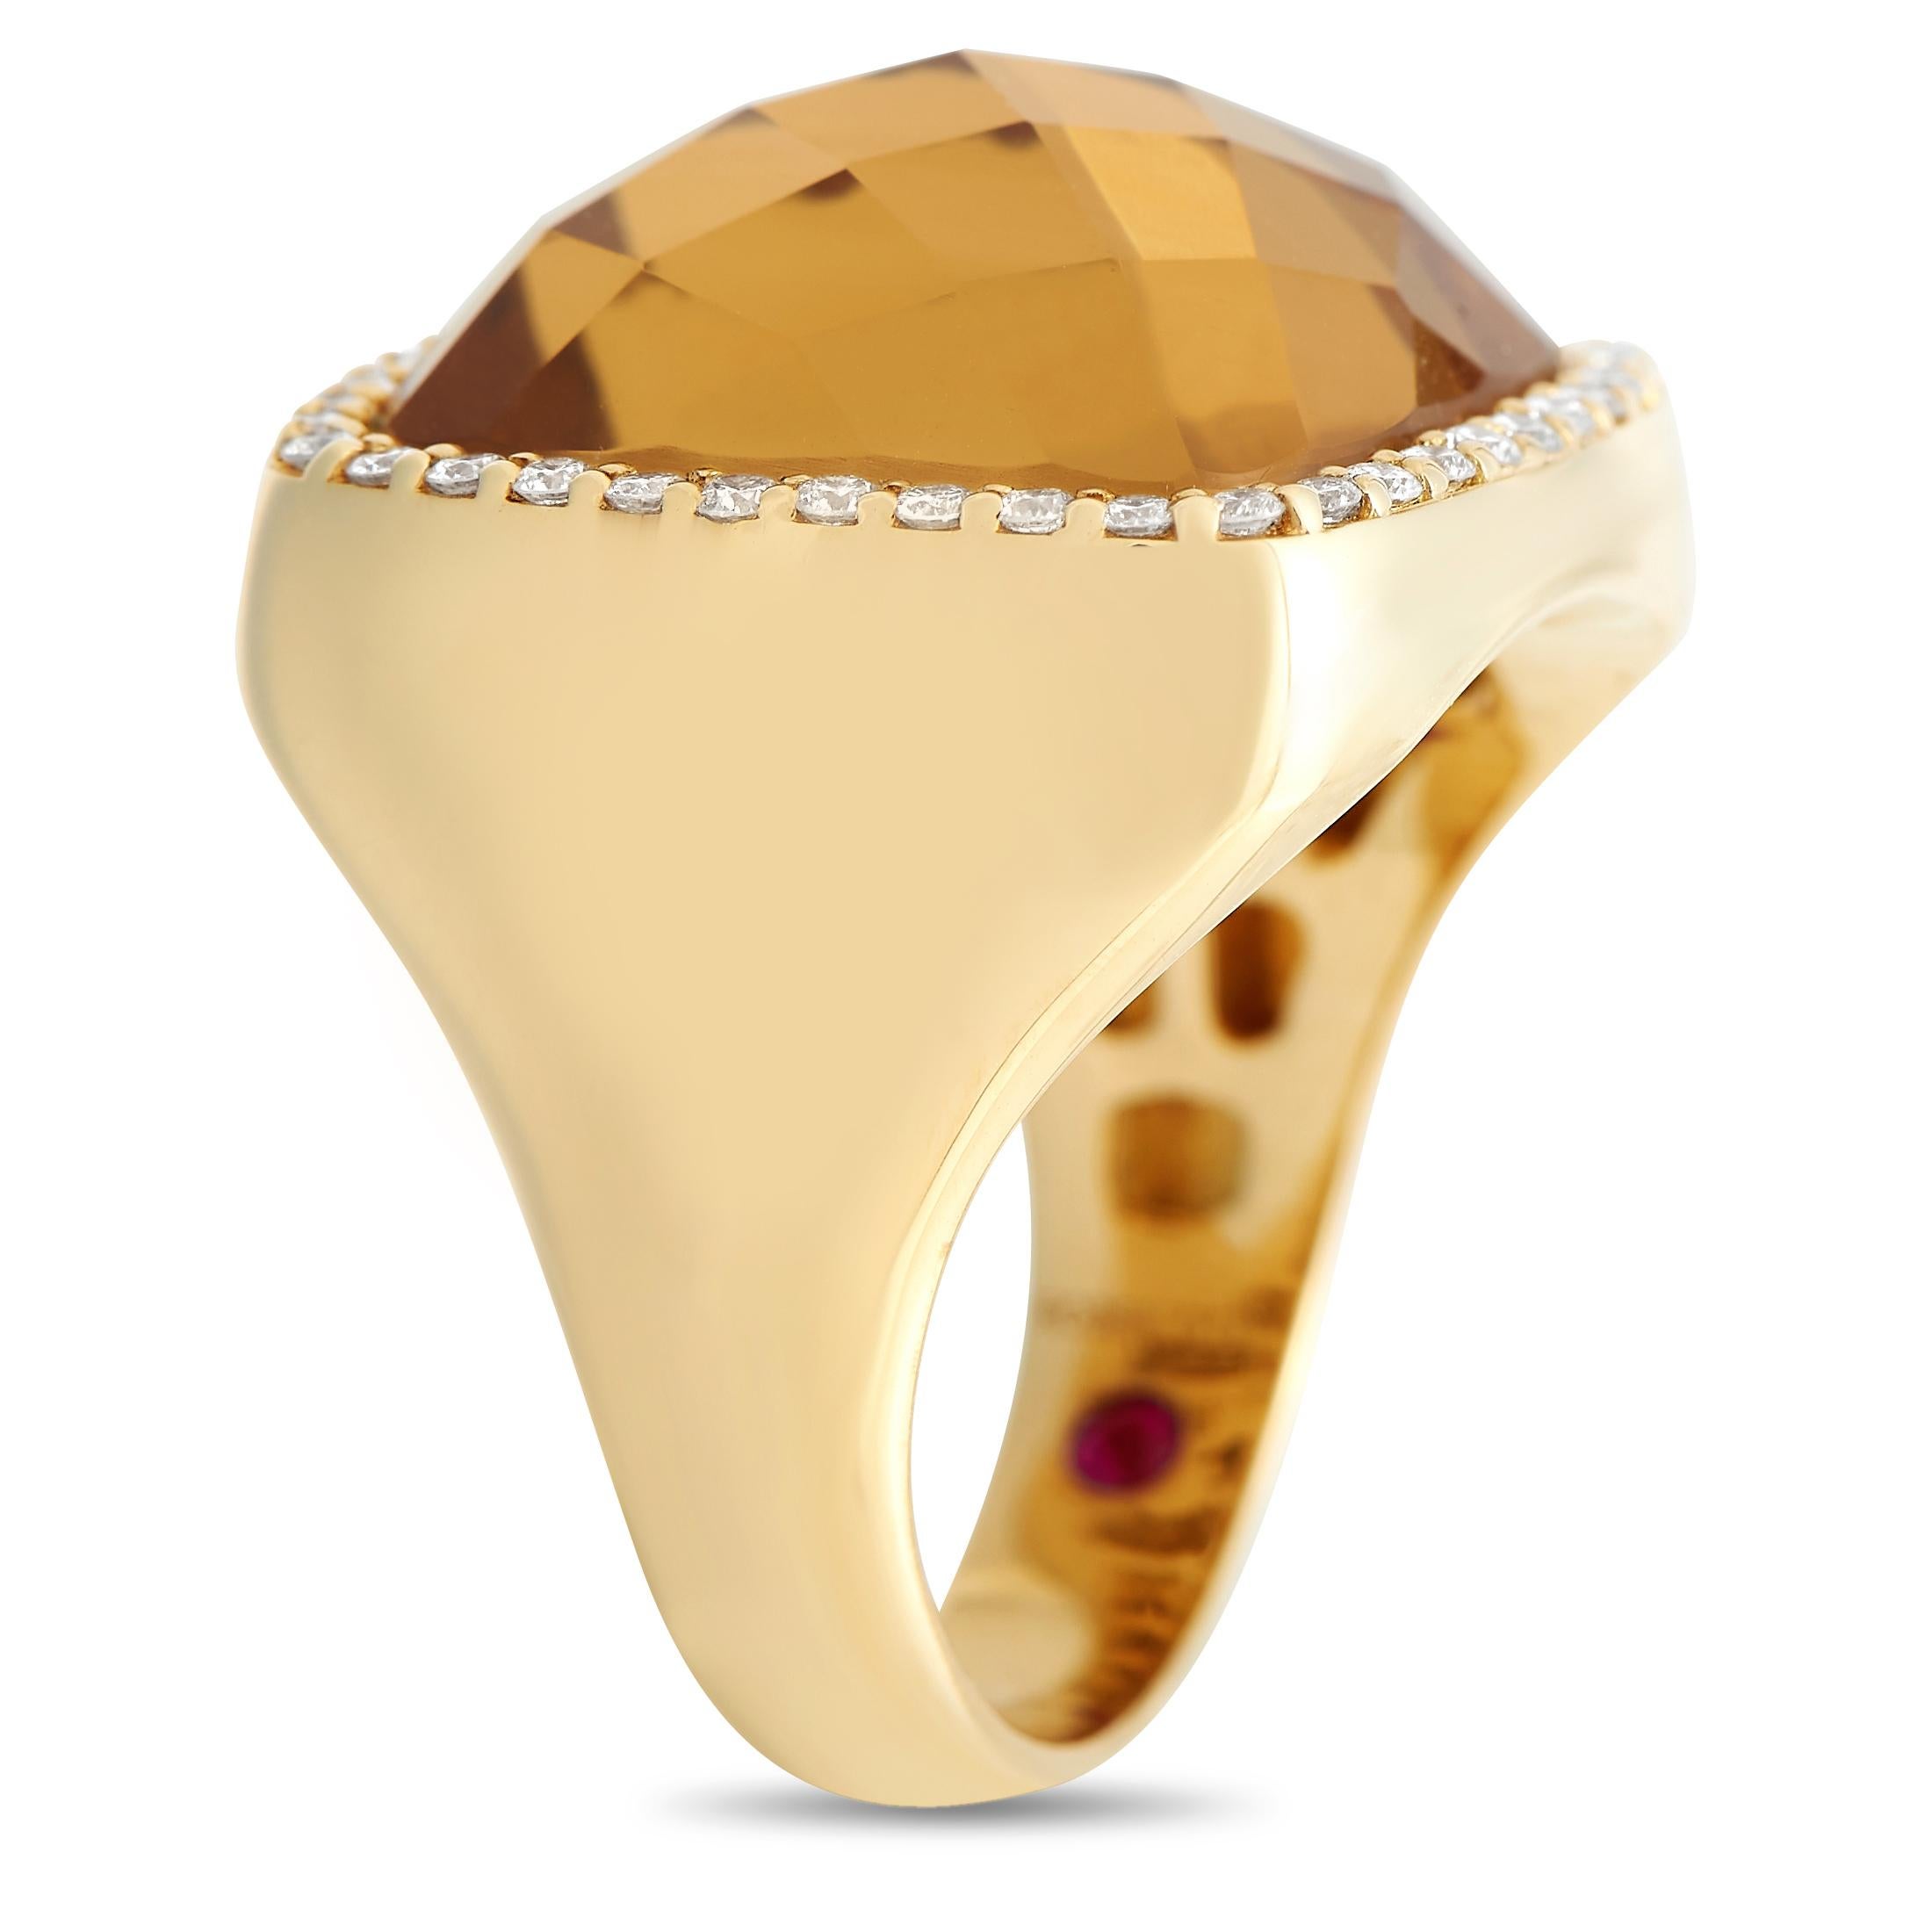 For the contemporary woman, here is a captivating cocktail ring from luxury Italian jewelry designer Roberto Coin. This 18K yellow gold ring shines a warm golden glow with its polished 5mm-thick shank with an 8mm top height. The shapely shank widens